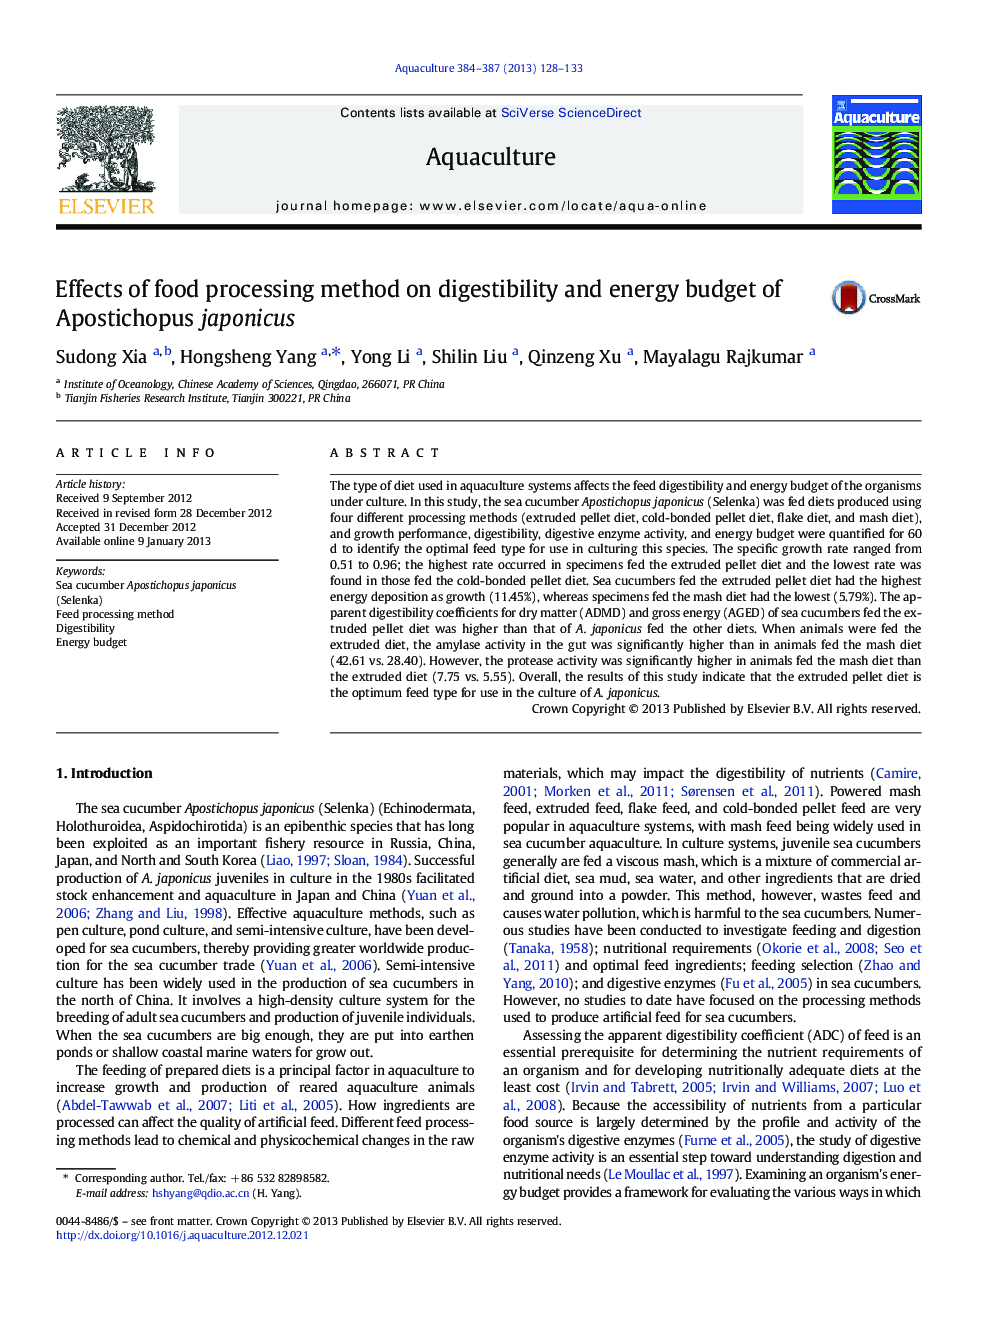 Effects of food processing method on digestibility and energy budget of Apostichopus japonicus